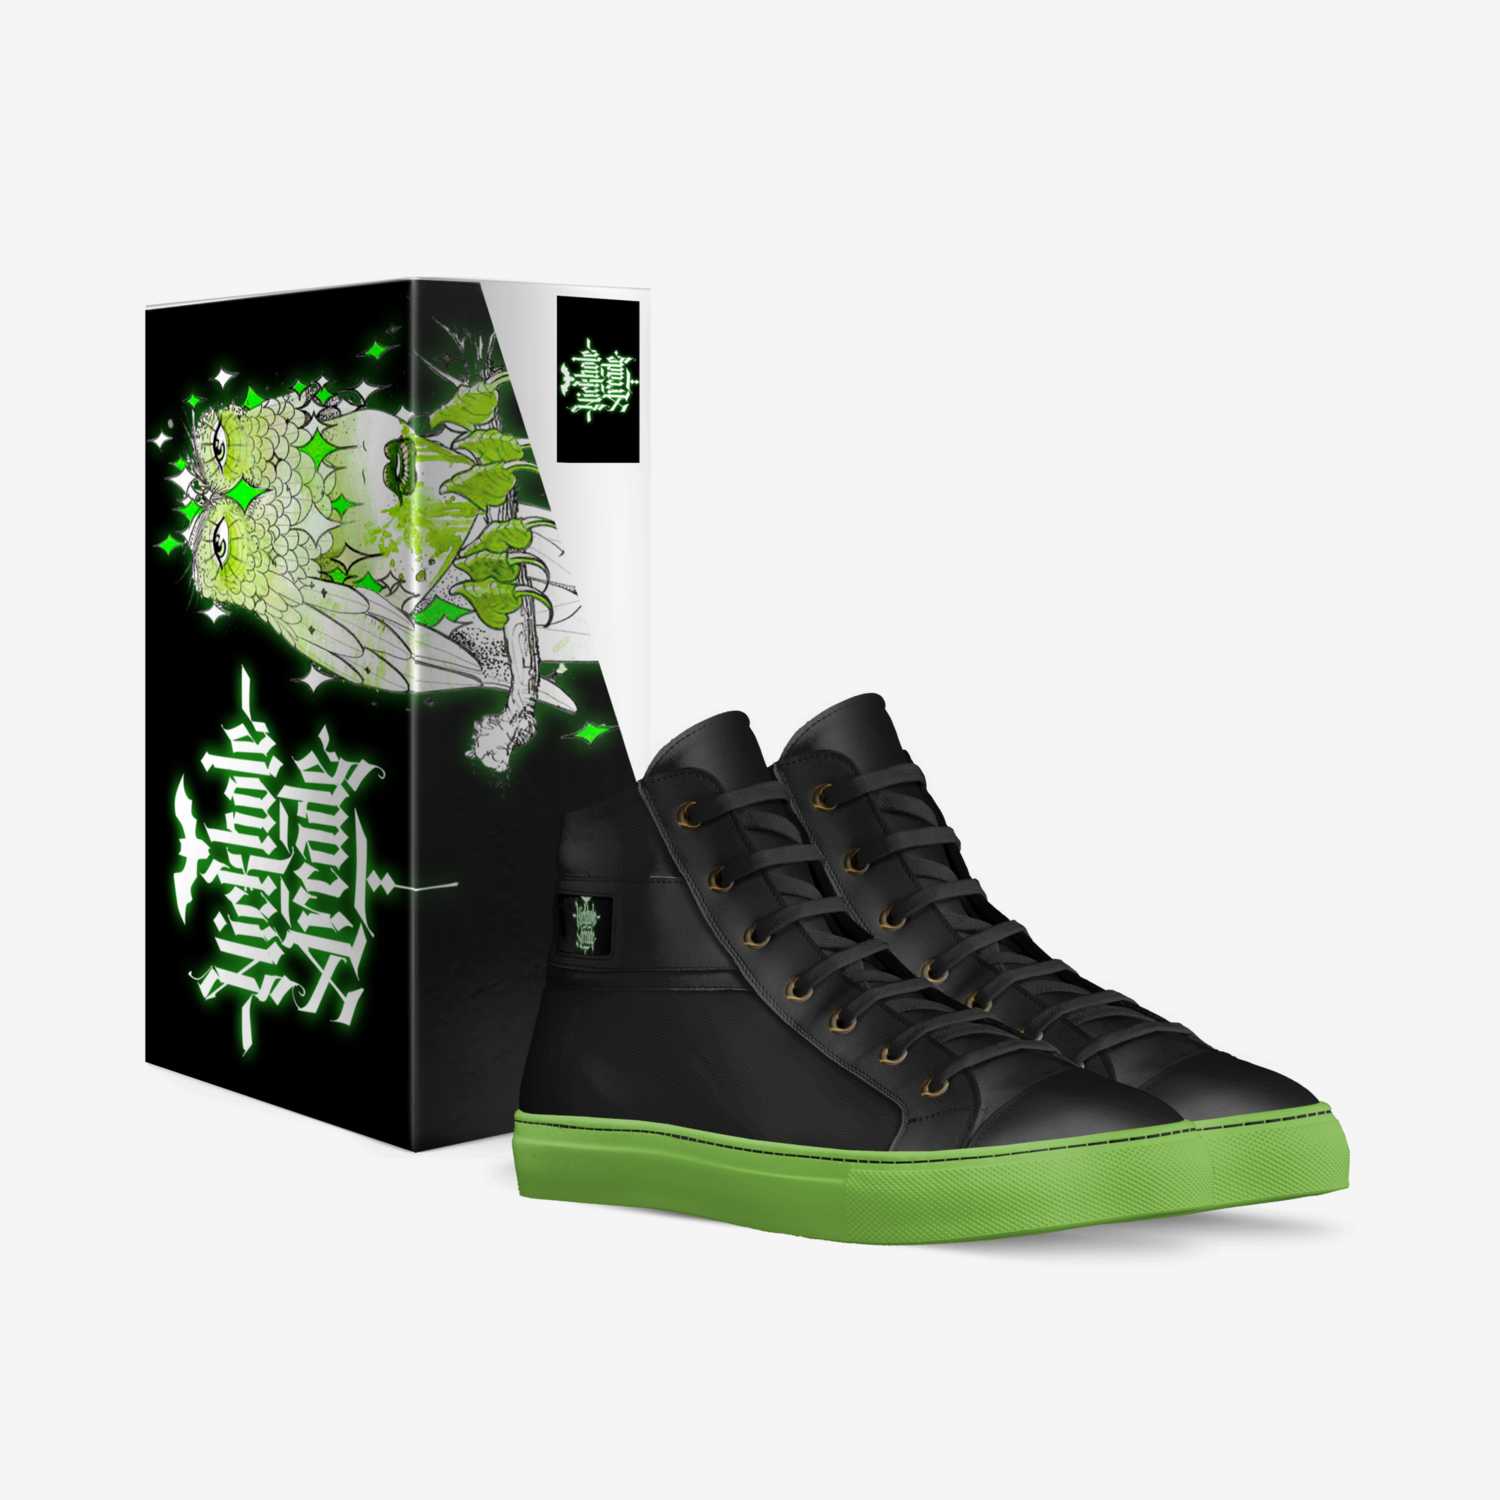 ghost hunt custom made in Italy shoes by Nickhole Arcade | Box view